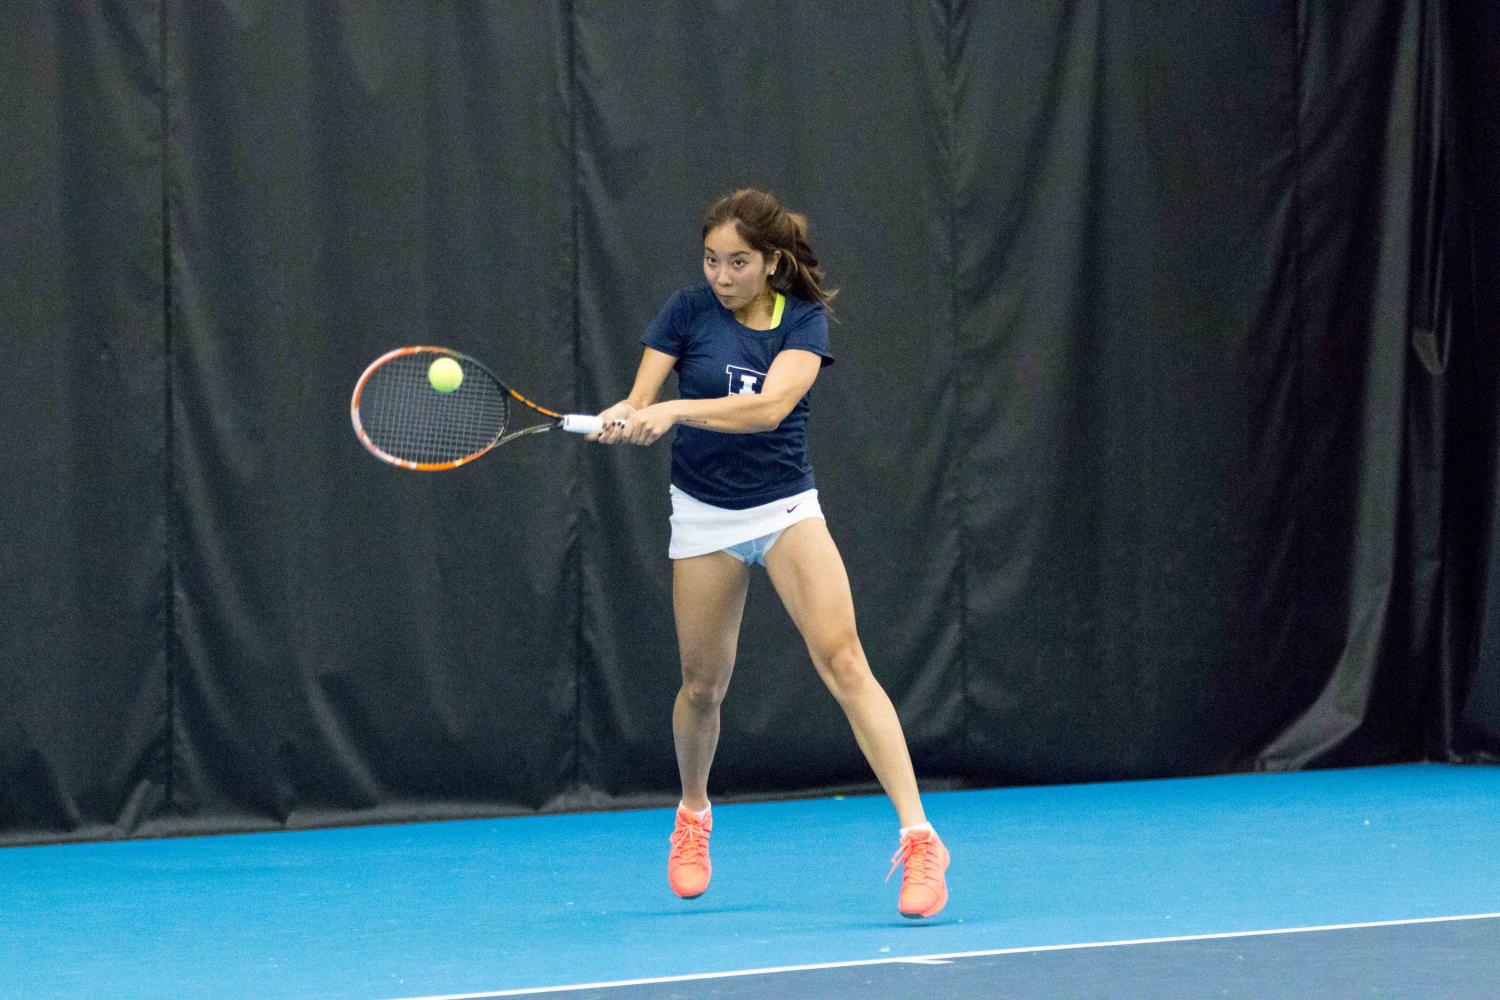 Illinois  Louise Kwong returns the ball during the match against DePaul at the Atkins Tennis Center on February 19.